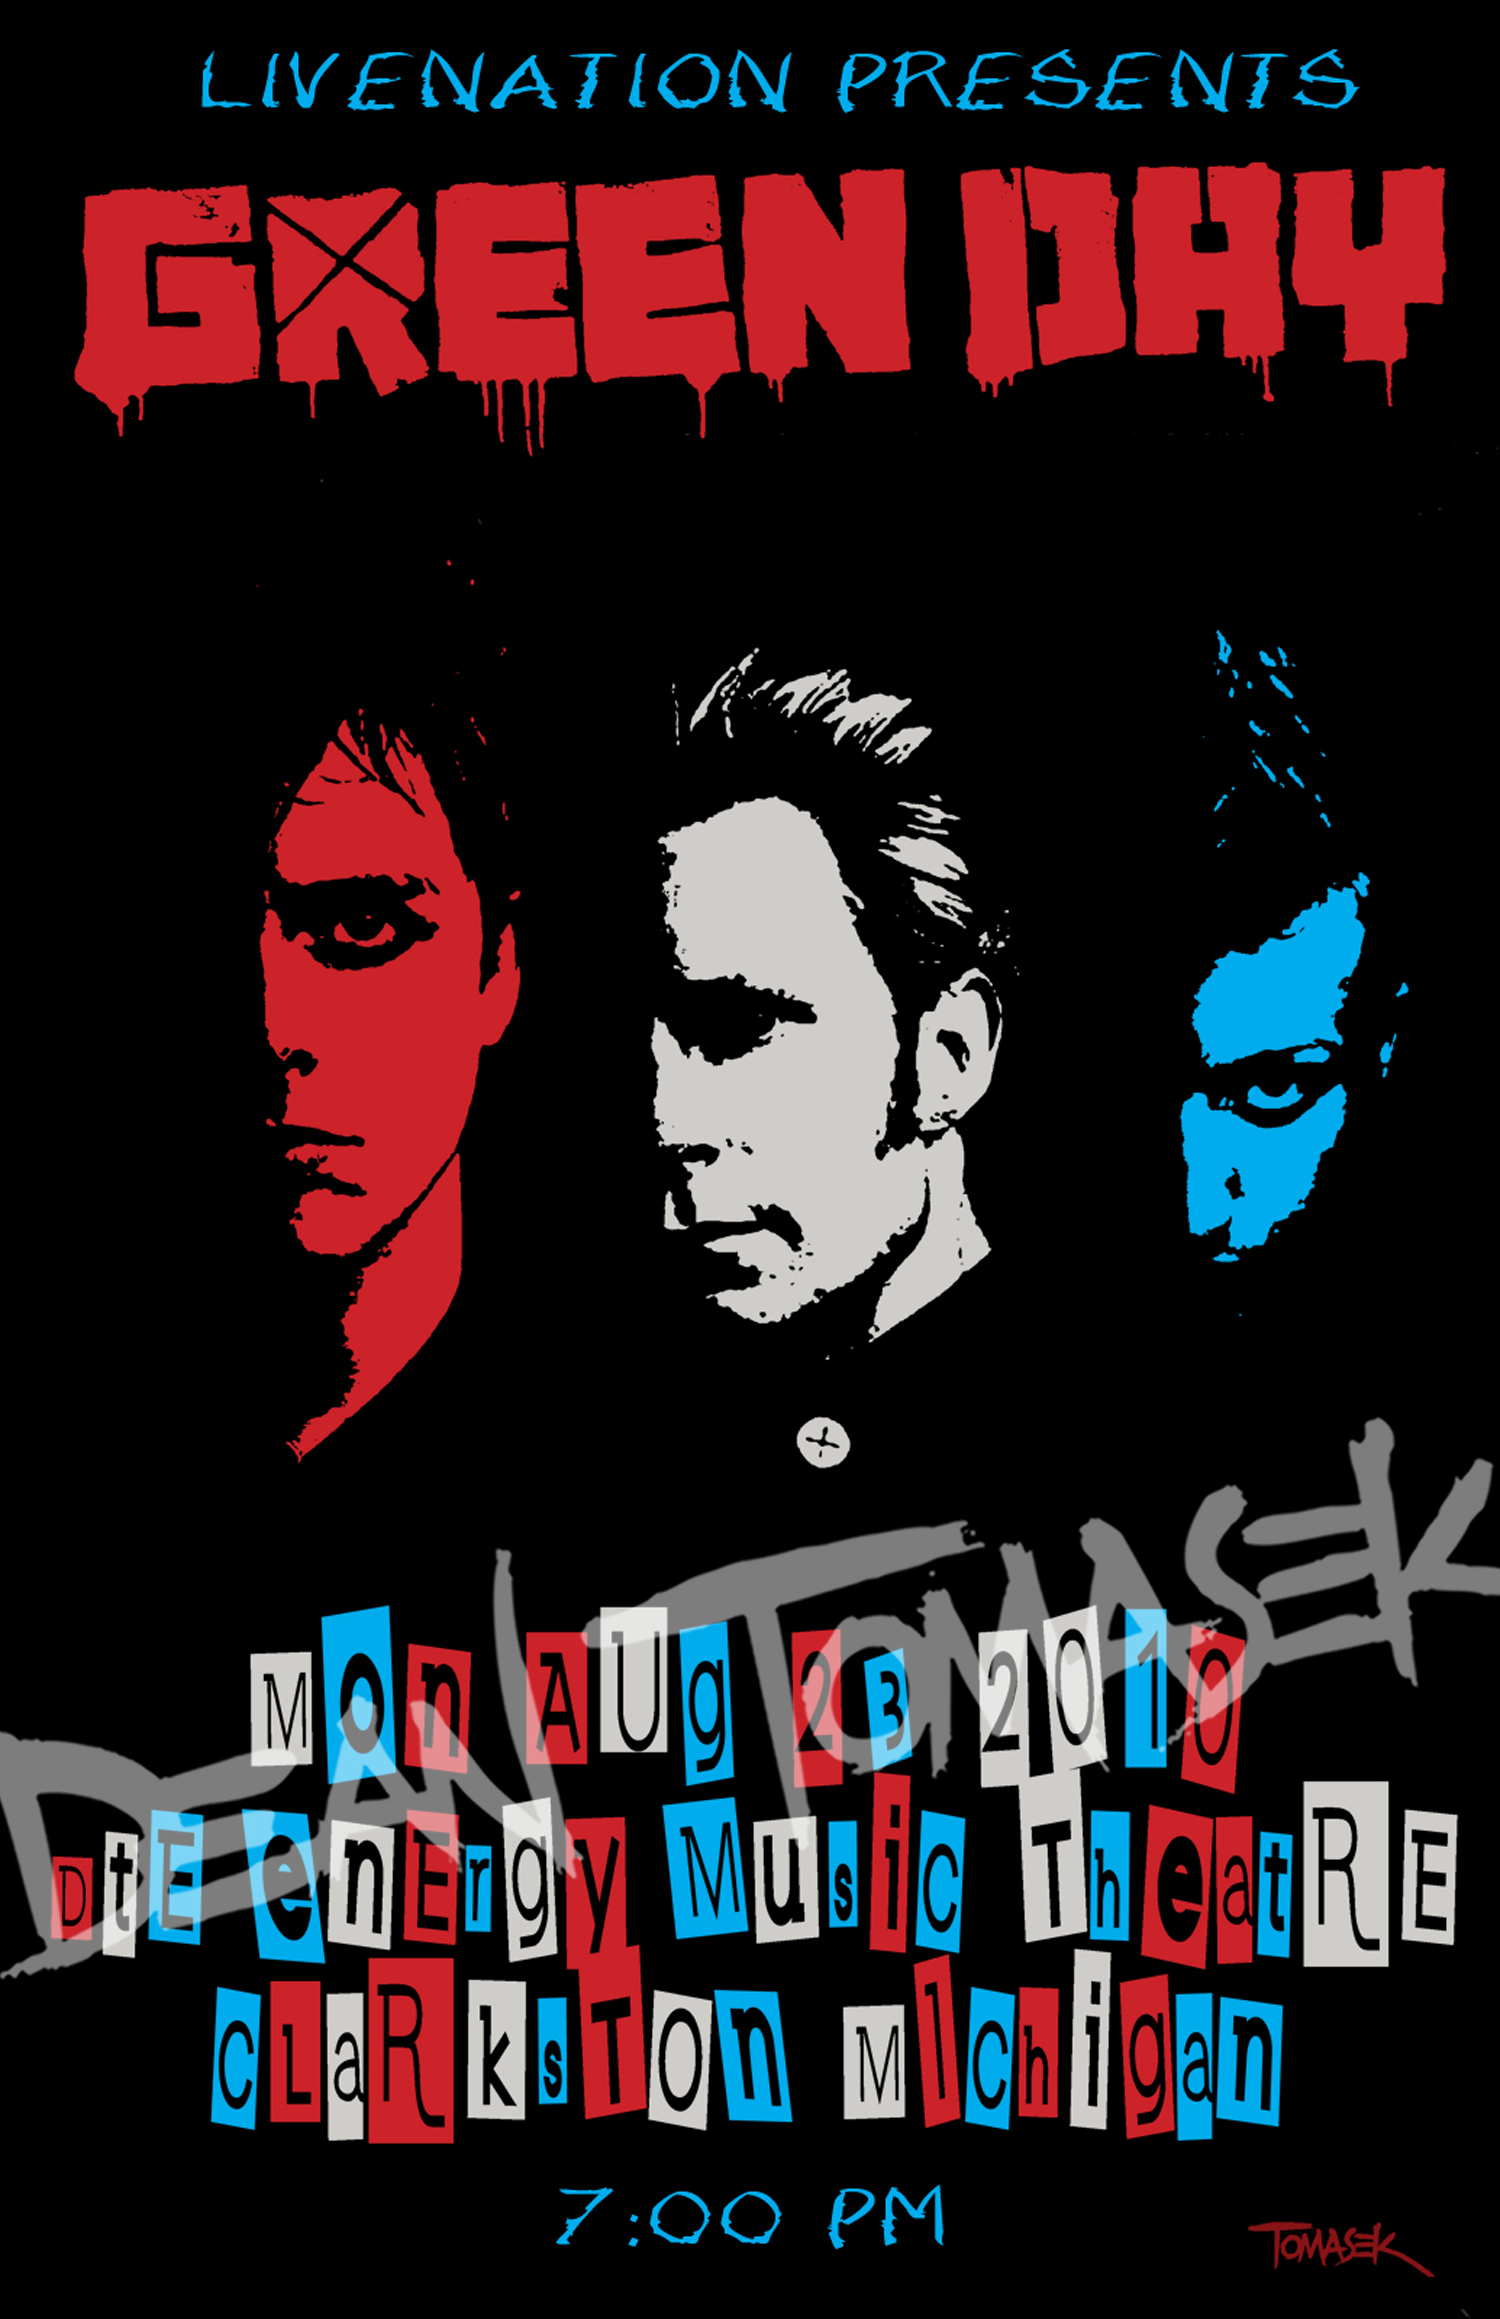 GREEN DAY Concert Poster 11